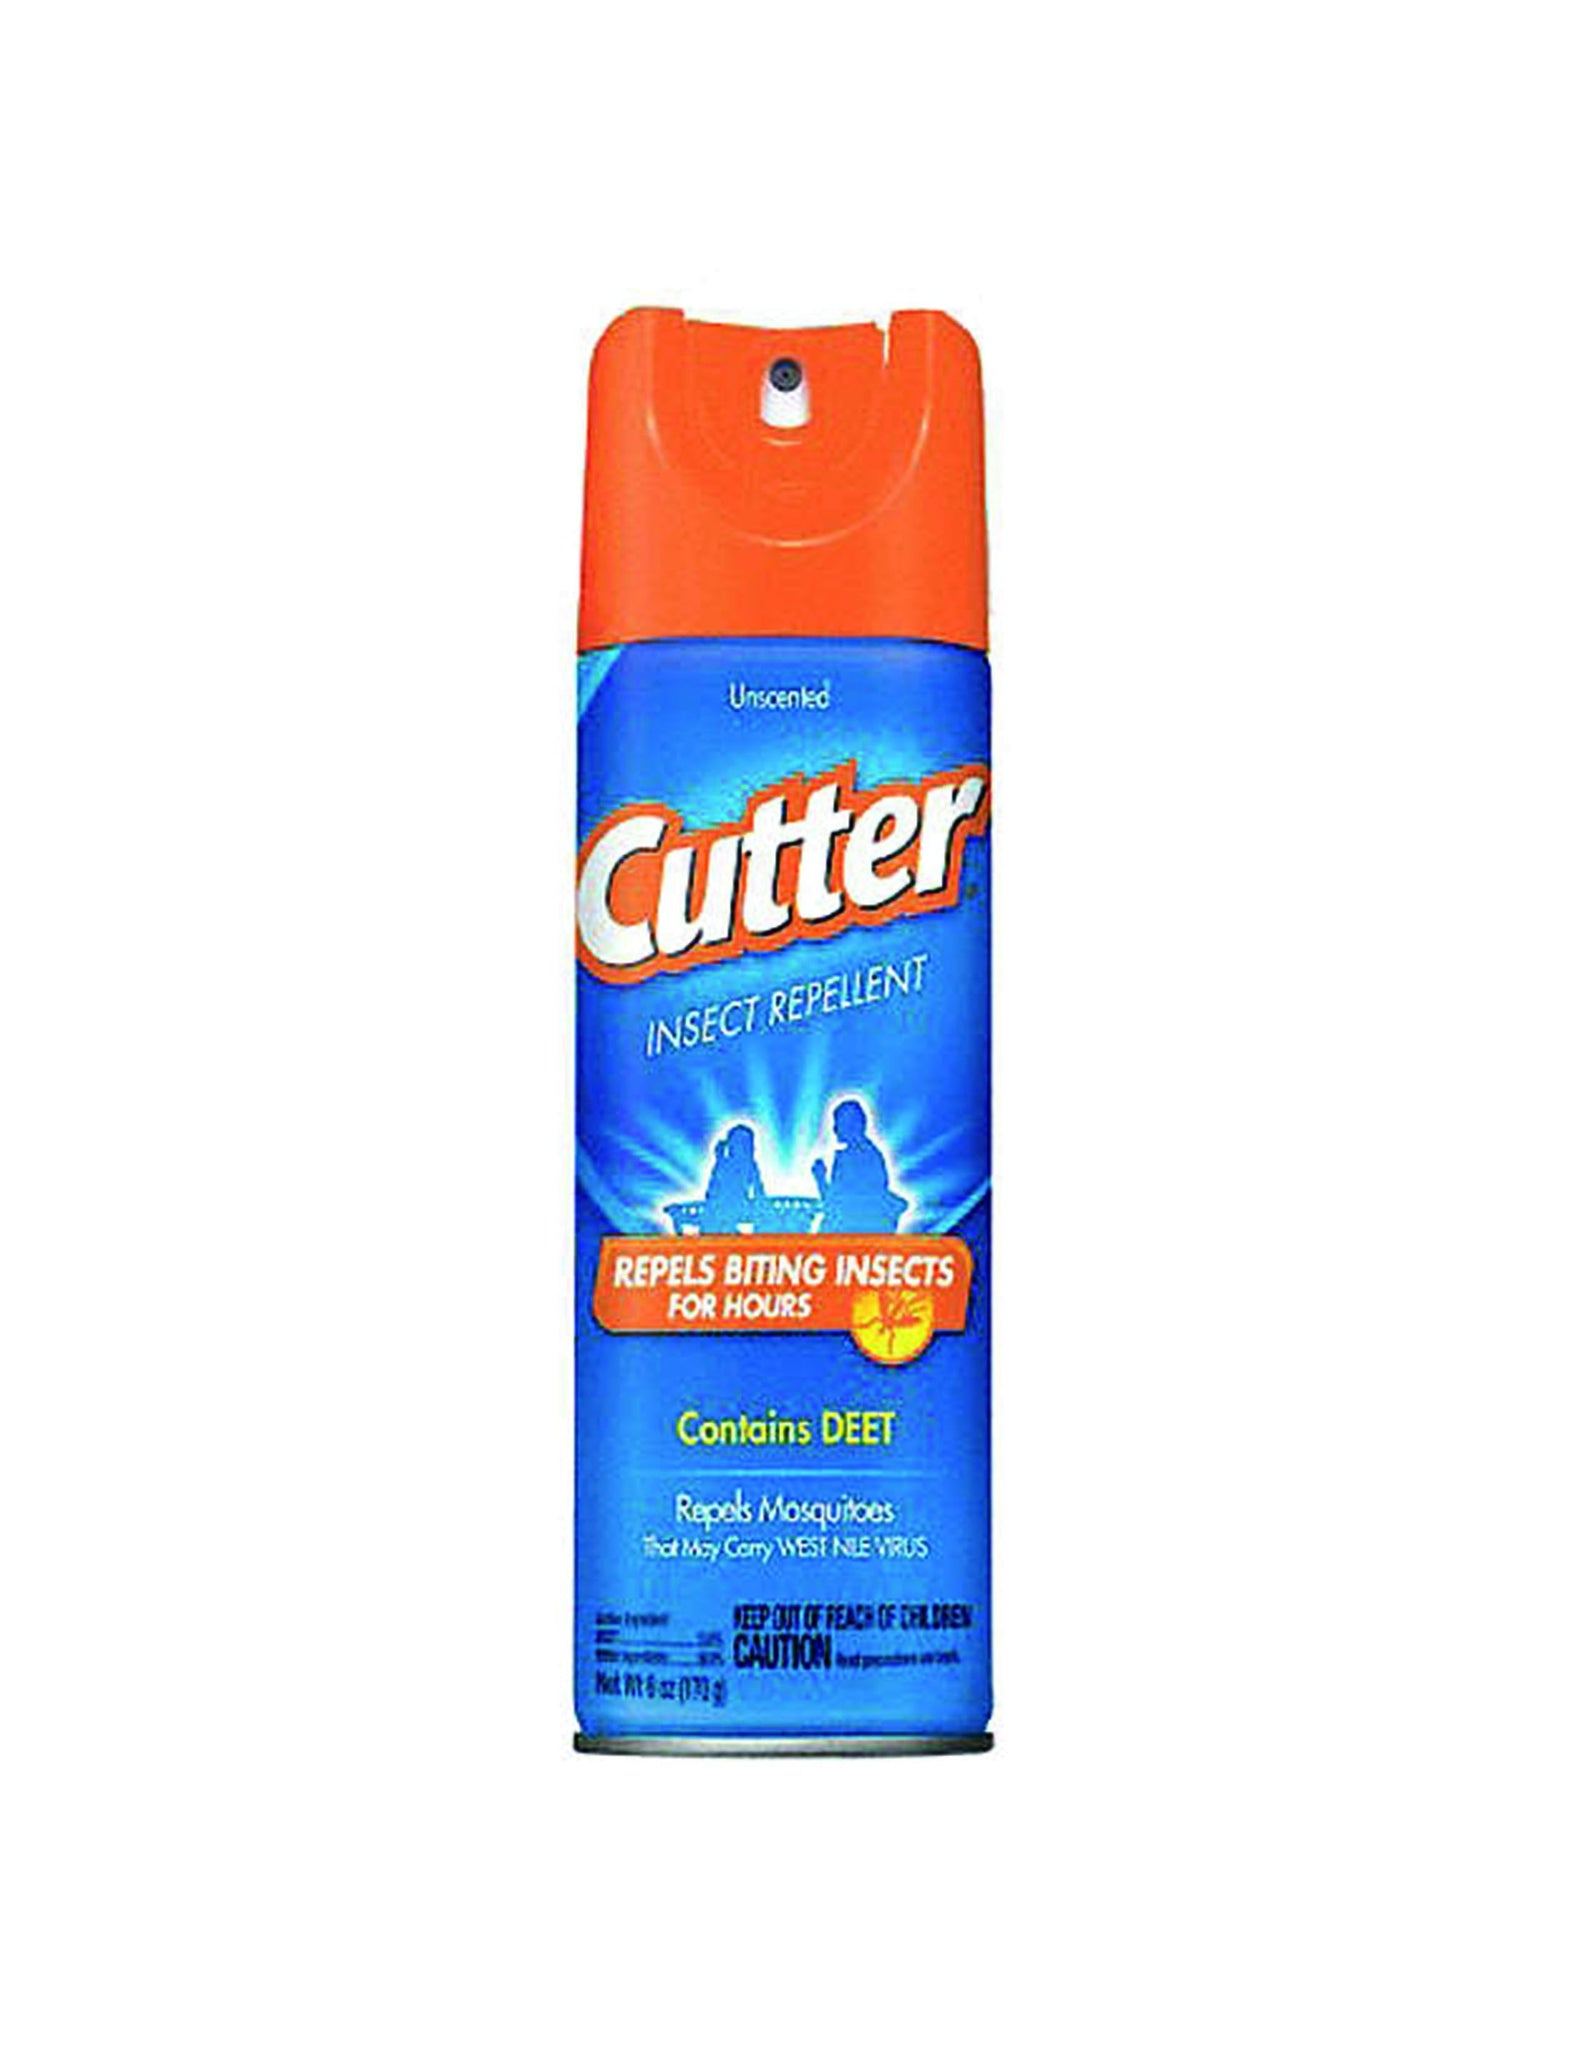 bel>Cutter Insect Repellent, 6 oz